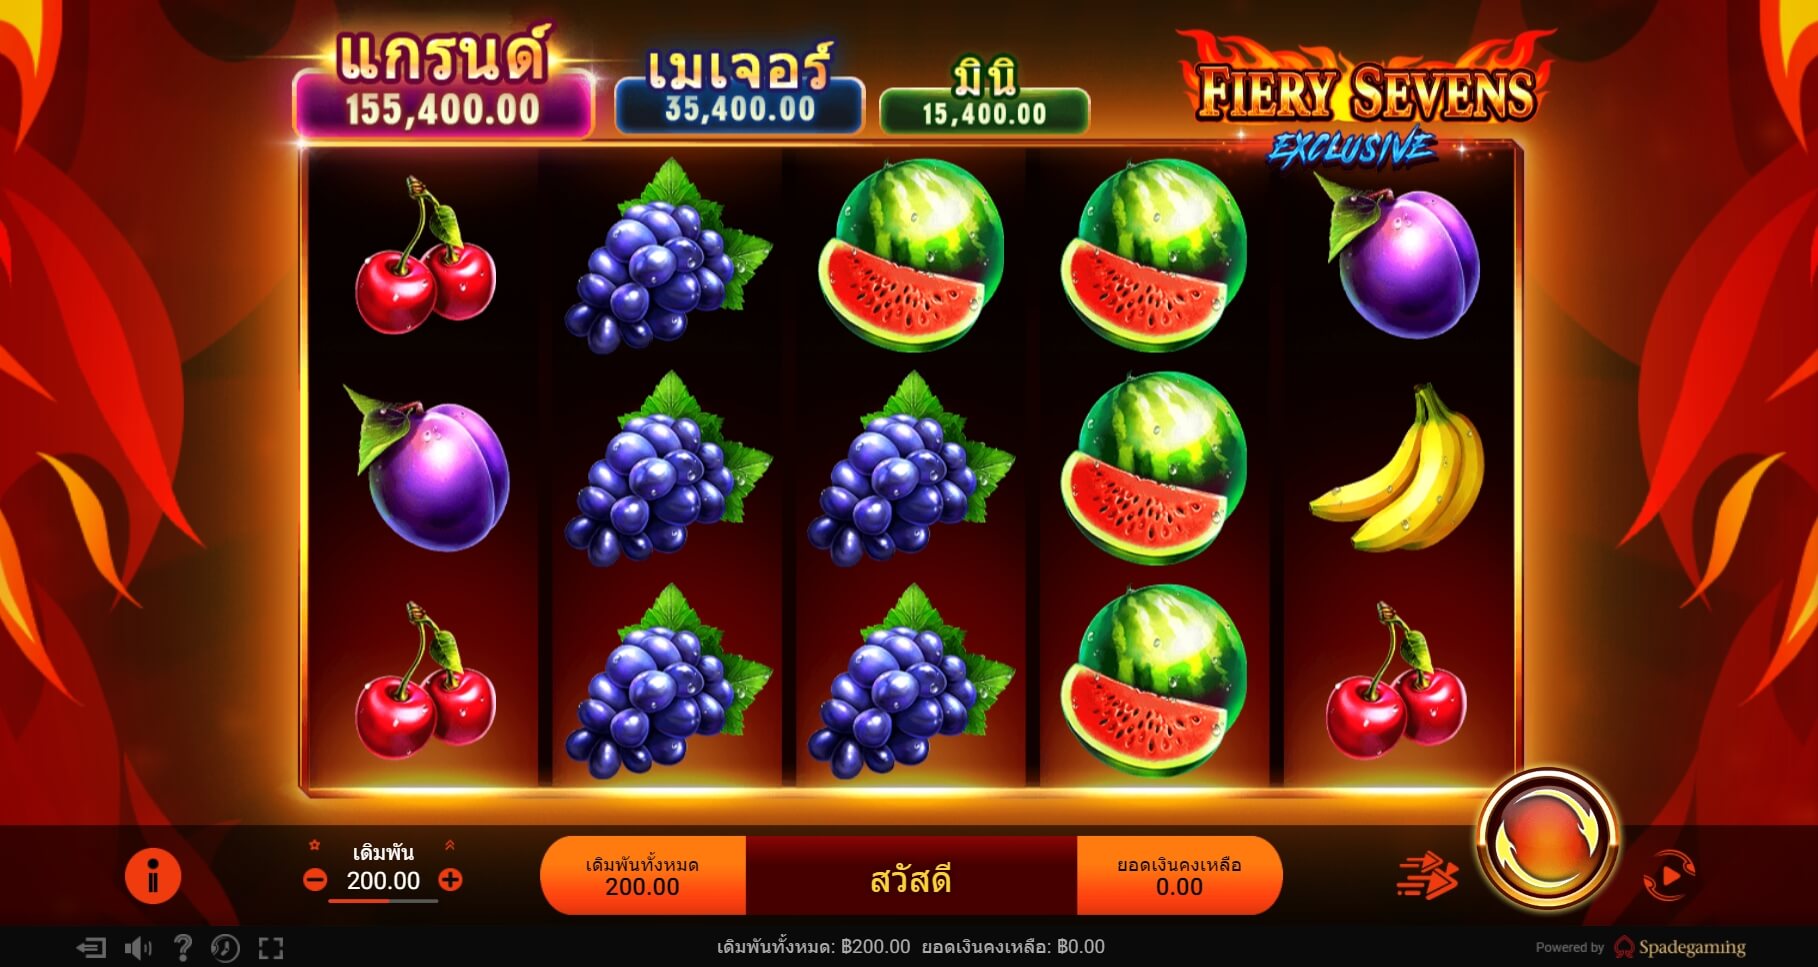 FIERY SEVENS EXCLUSIVE Spadegaming AMBBET เครดิตฟรี